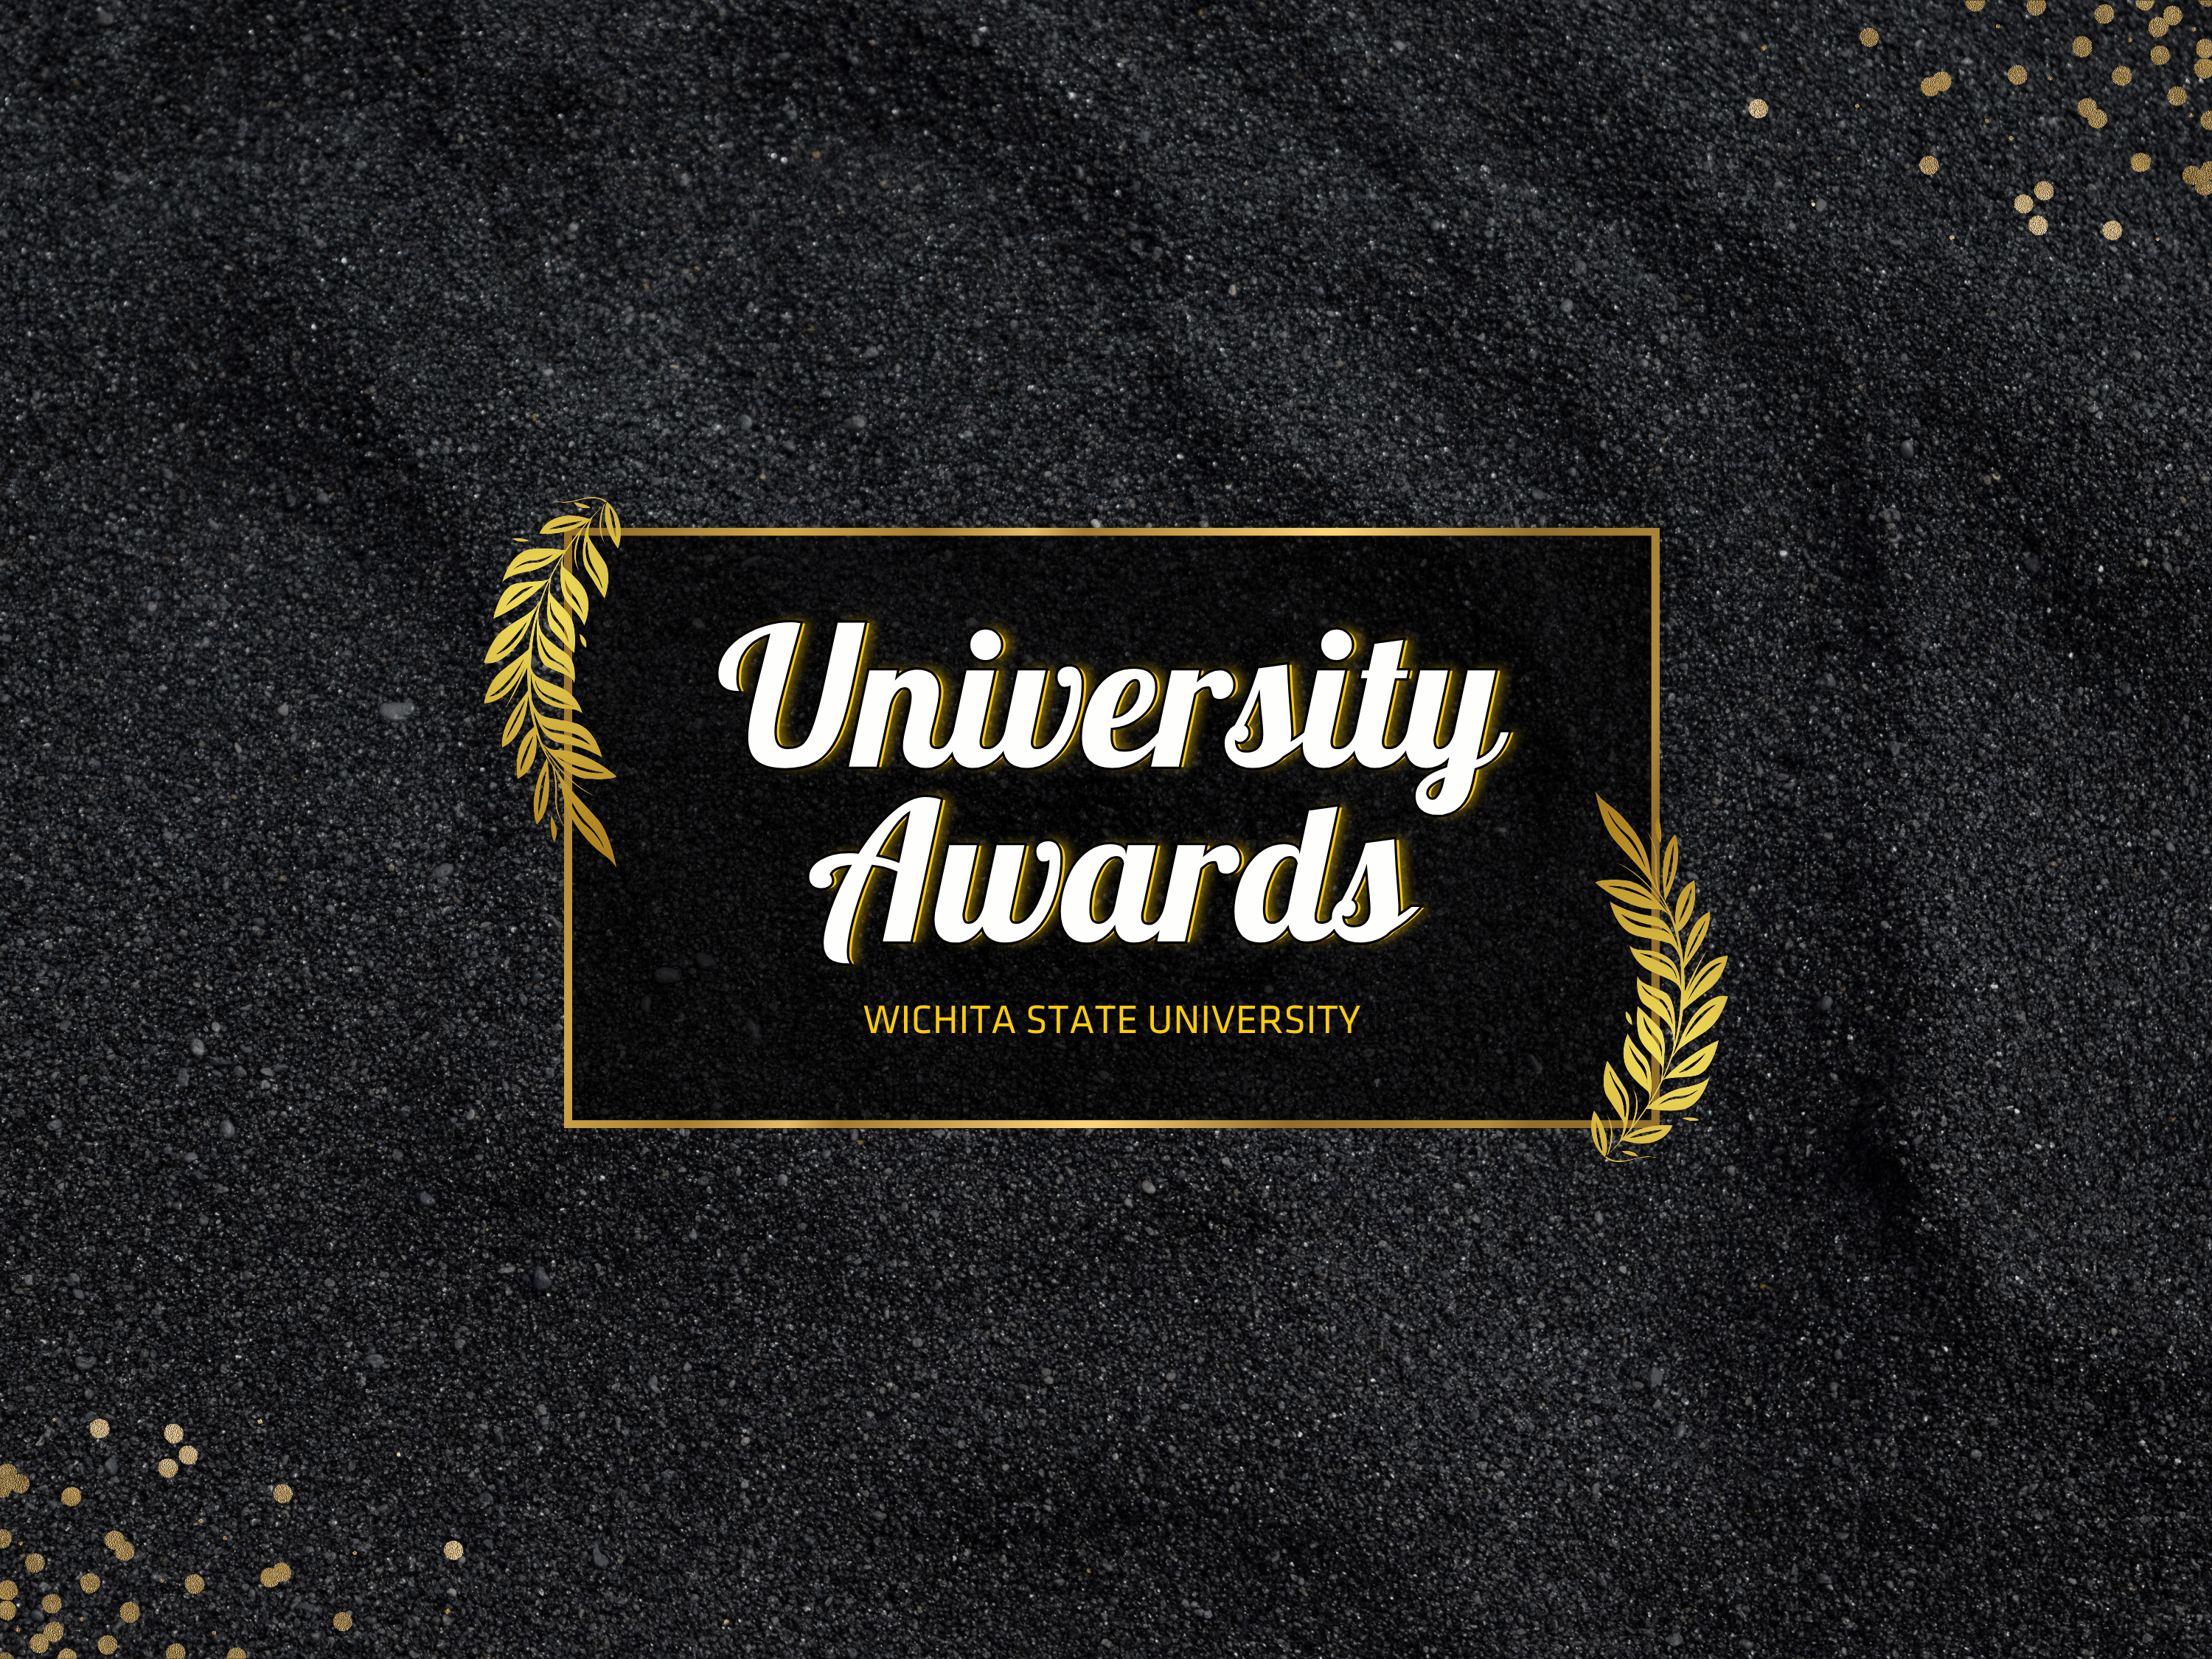 The words "University Awards" on a black and gold background.